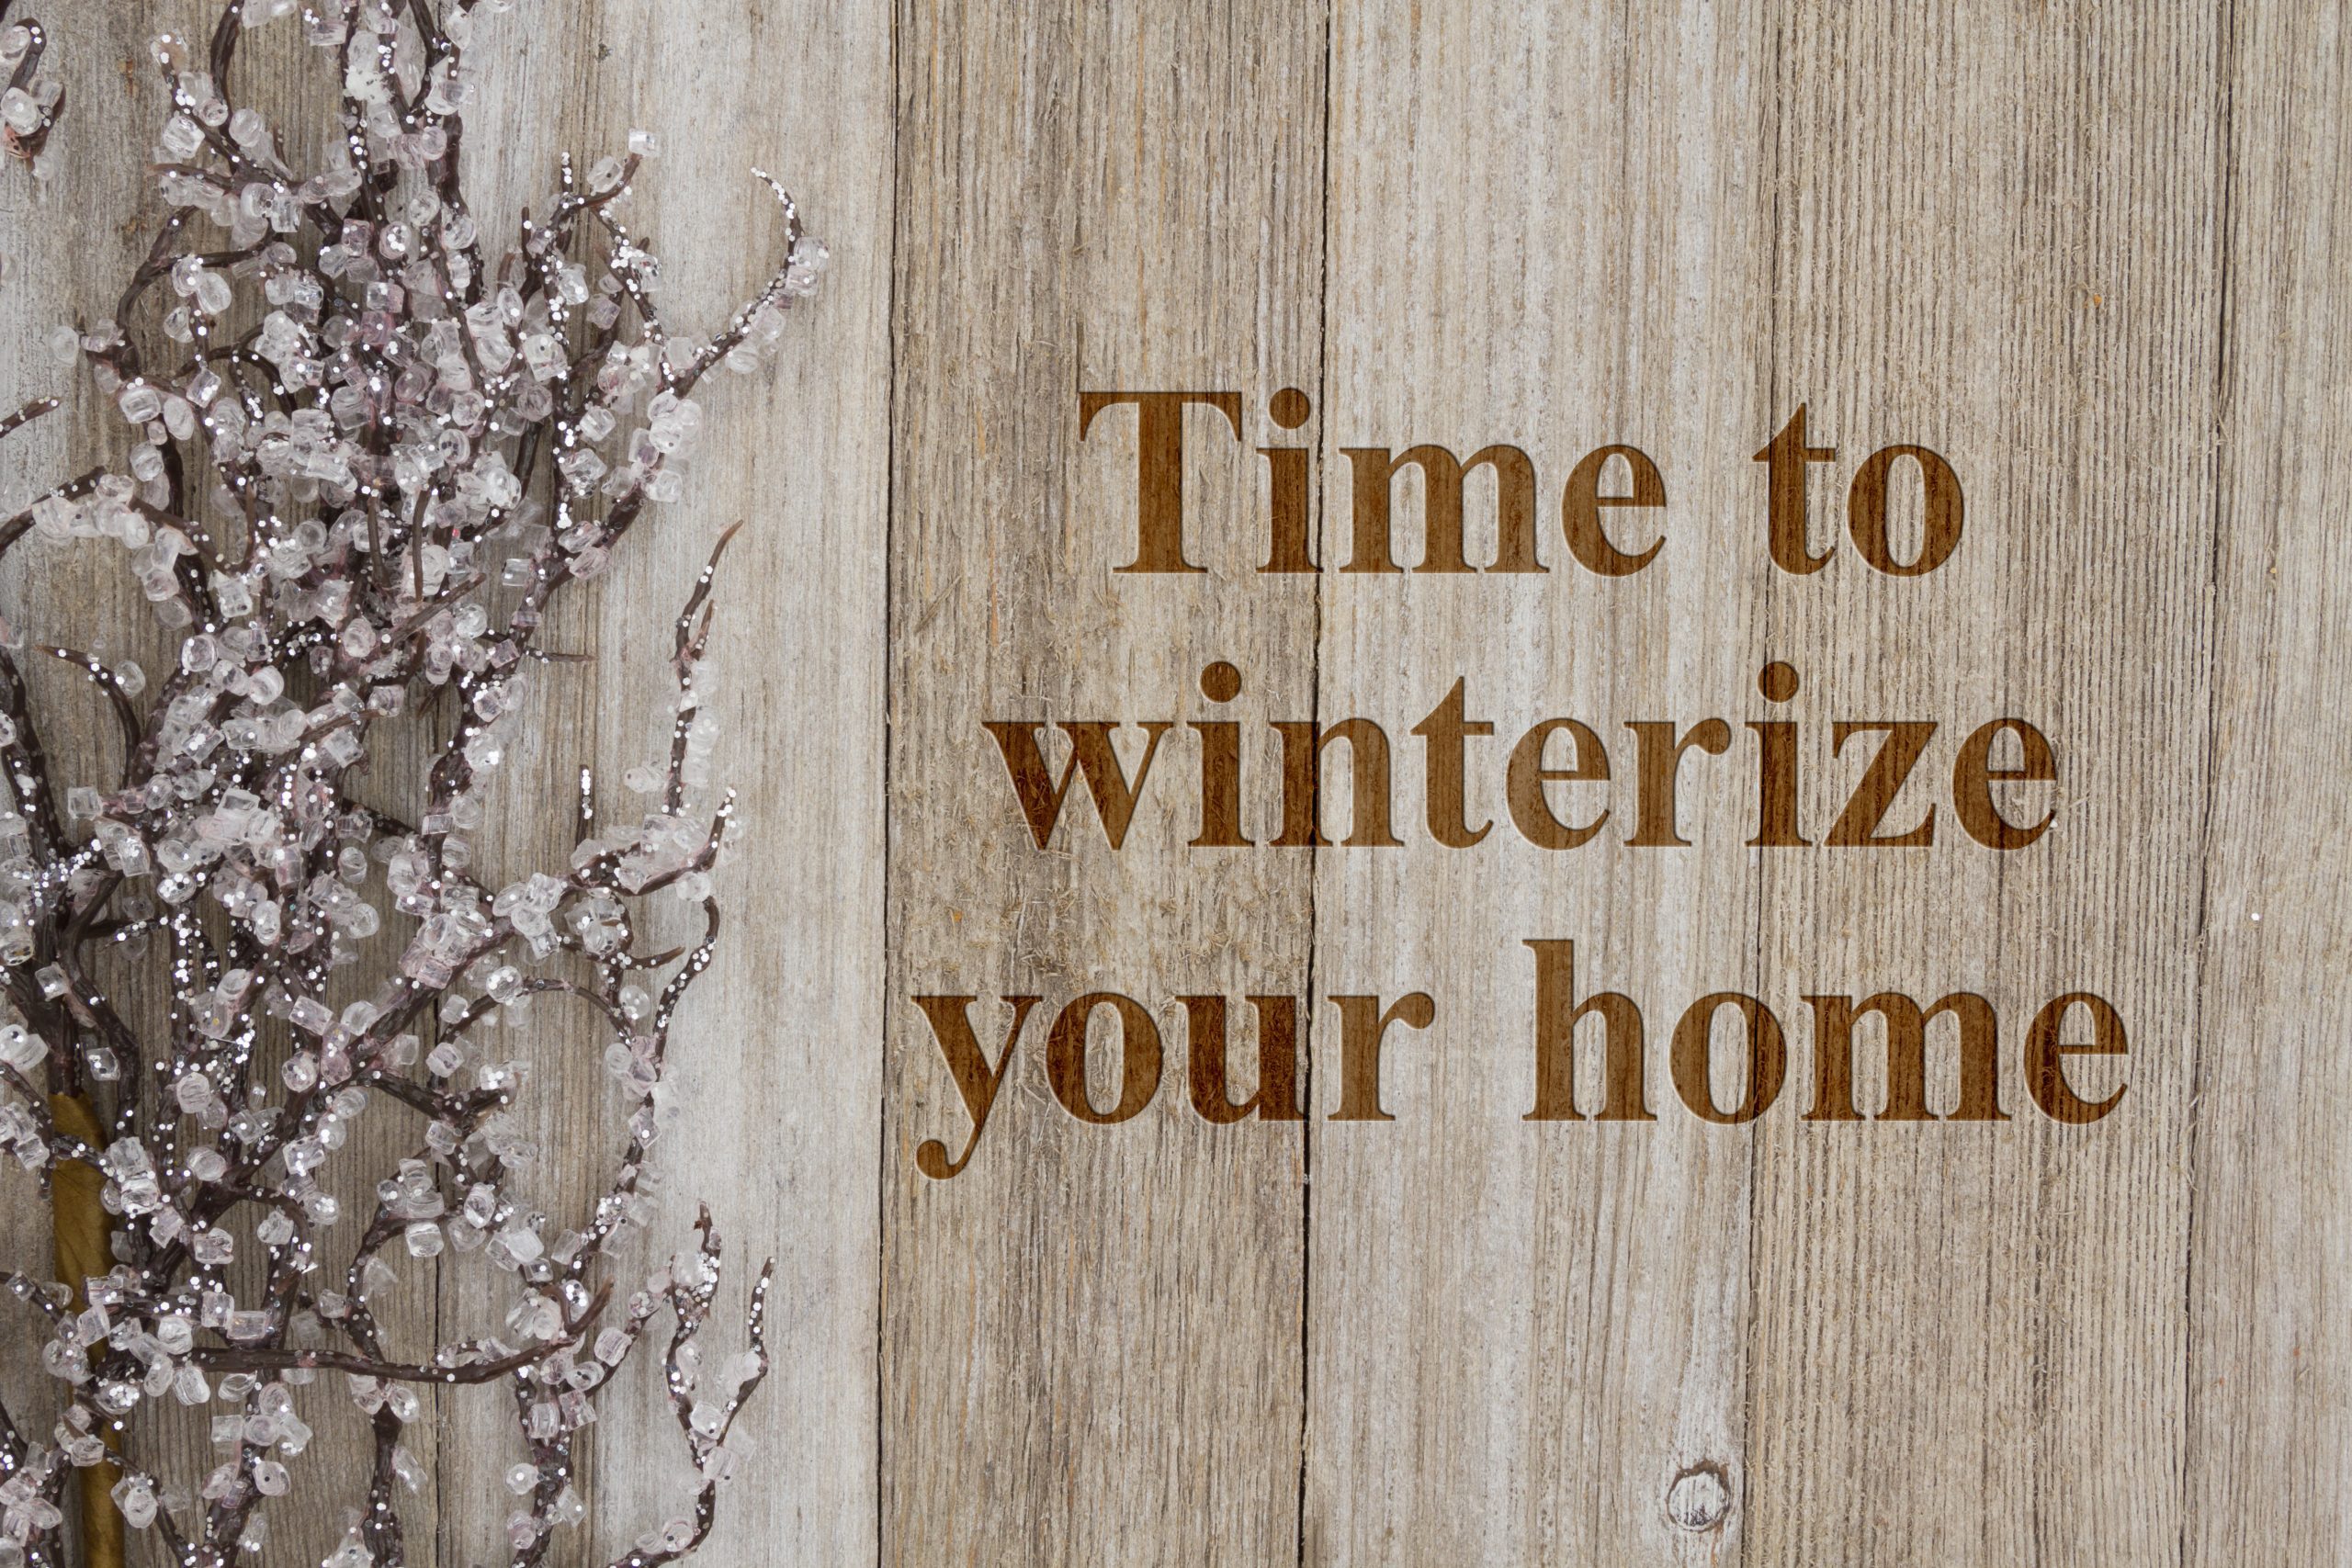 Winter background with "Time to Winterize Your Home" written out